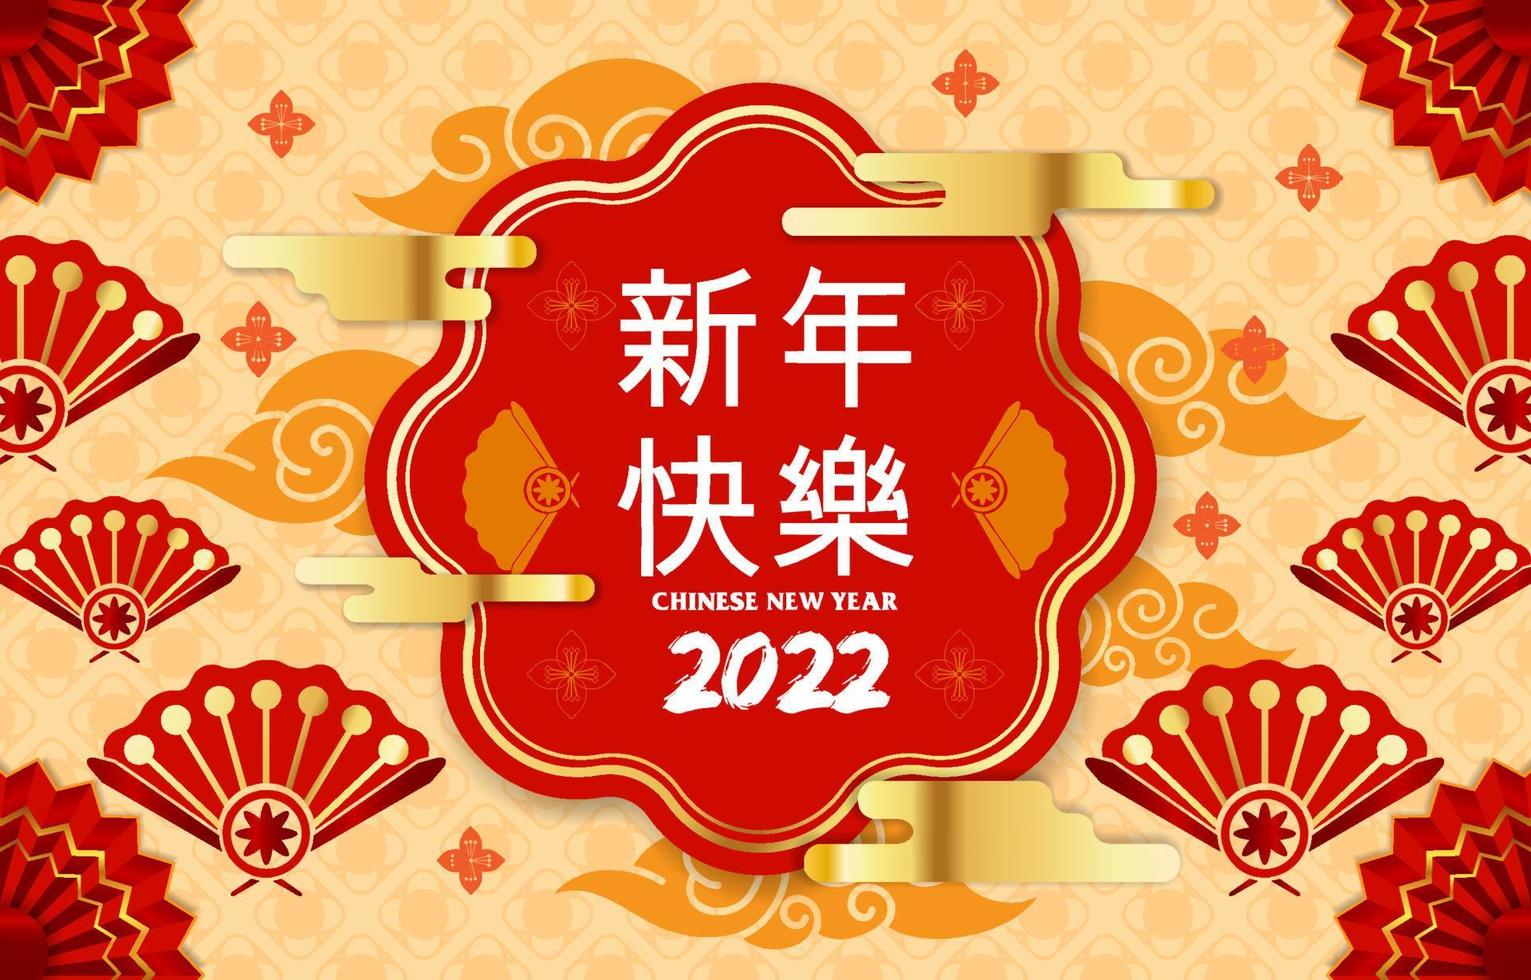 Happy Chinese New Year Background vector